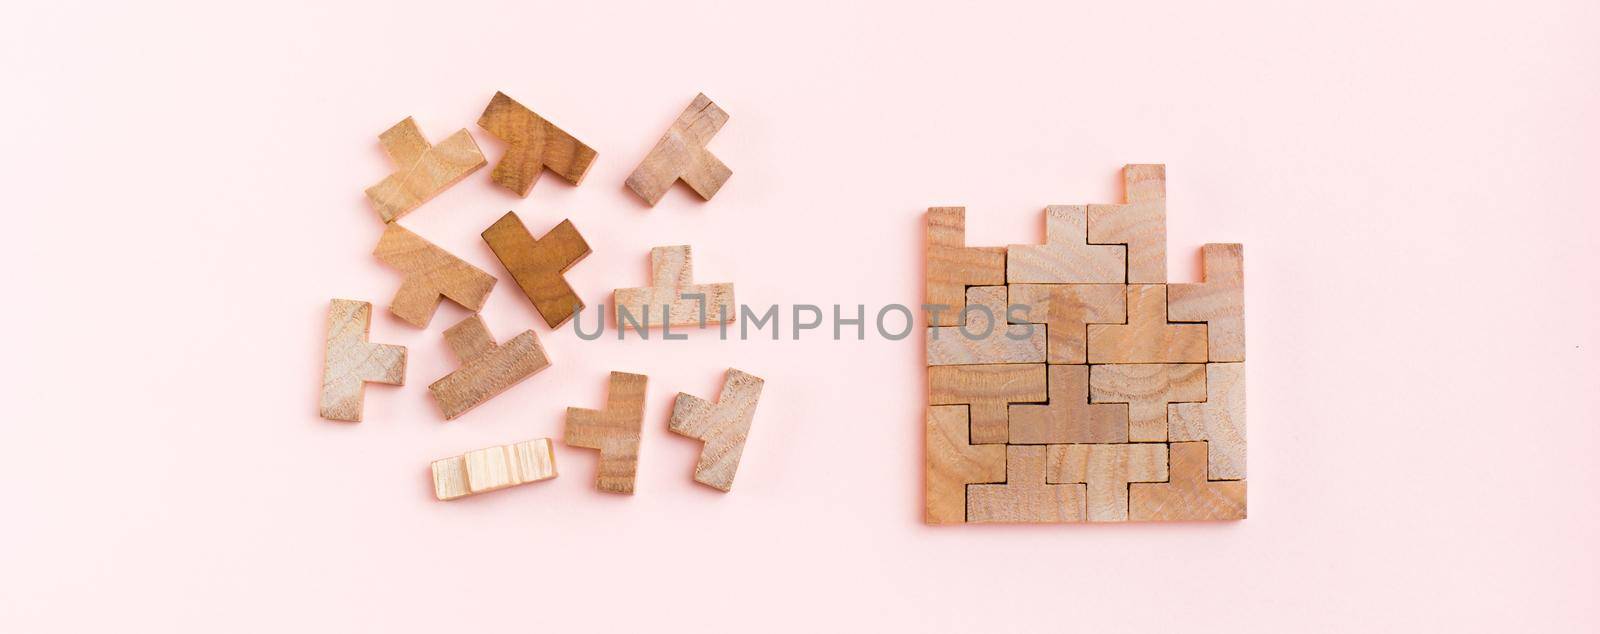 Organization and order. Wooden puzzle pieces are stacked correctly and chaotically scattered in disarray on a pink background. Web banner